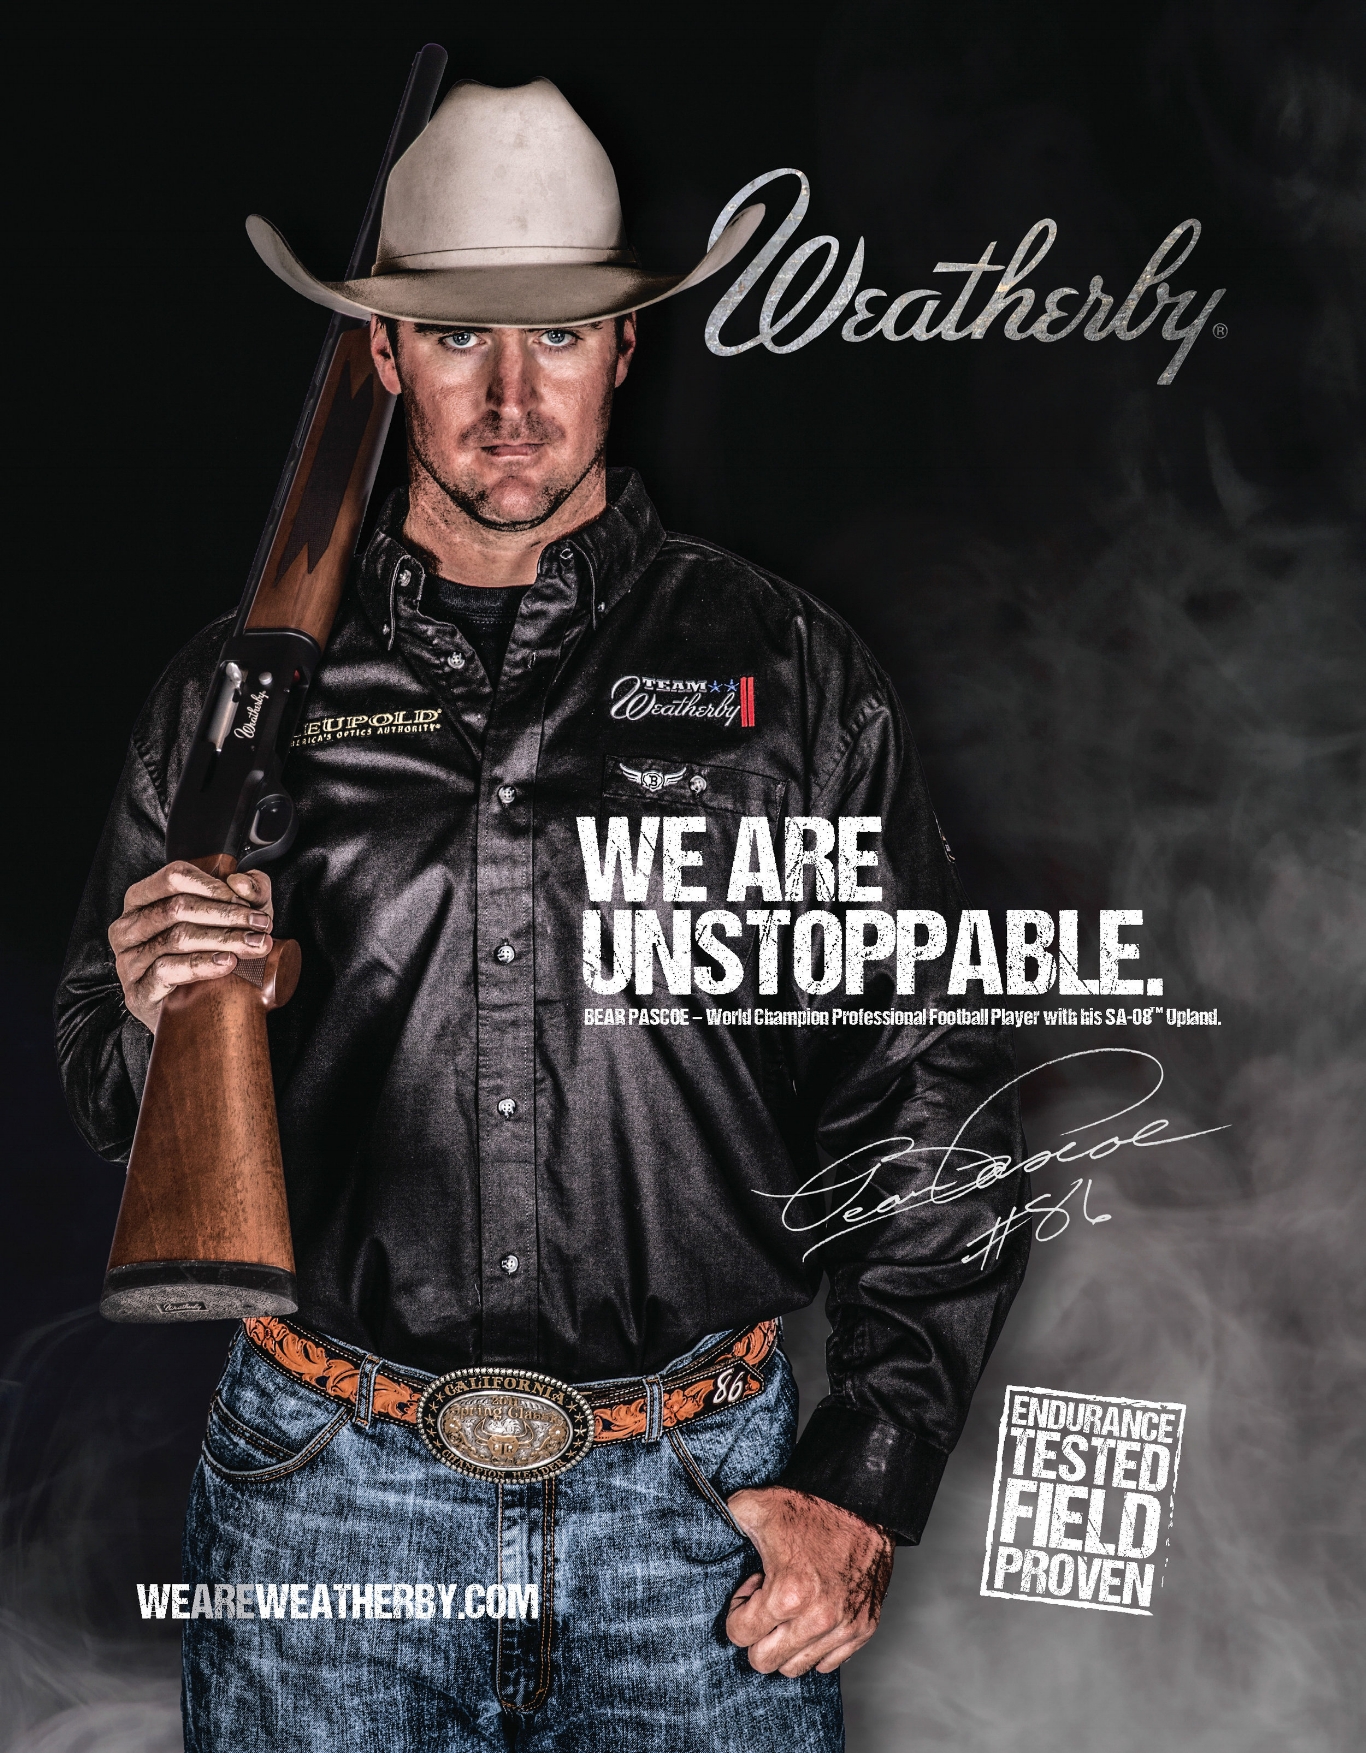 2014 Weatherby Ad Campaign